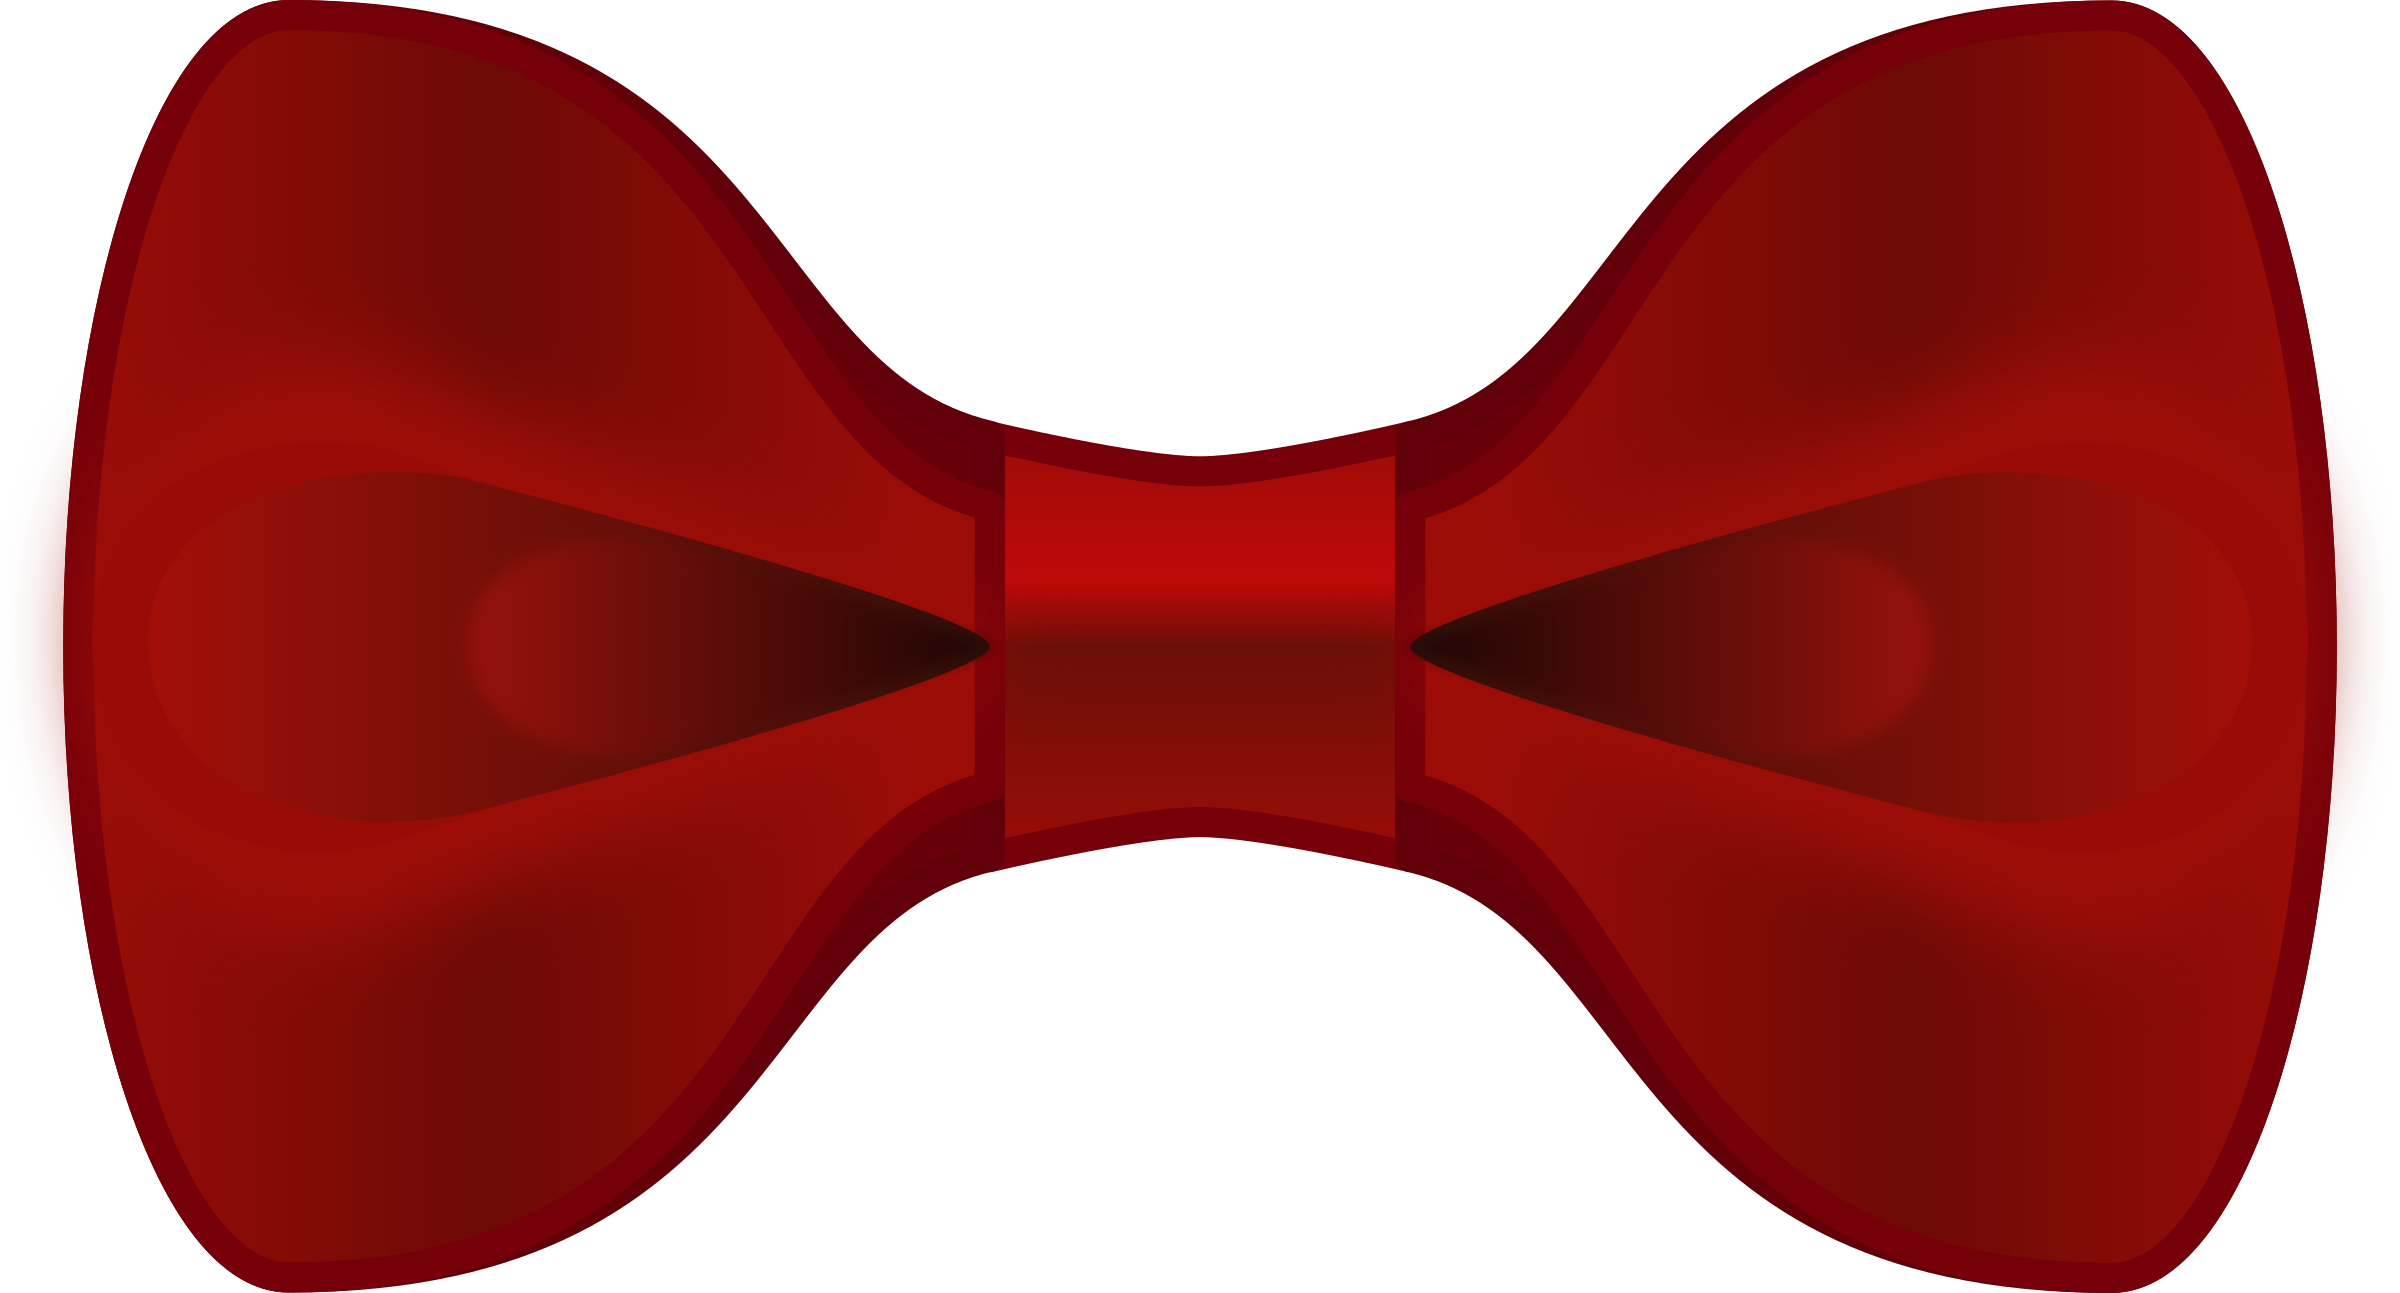 bow tie clipart images - photo #7